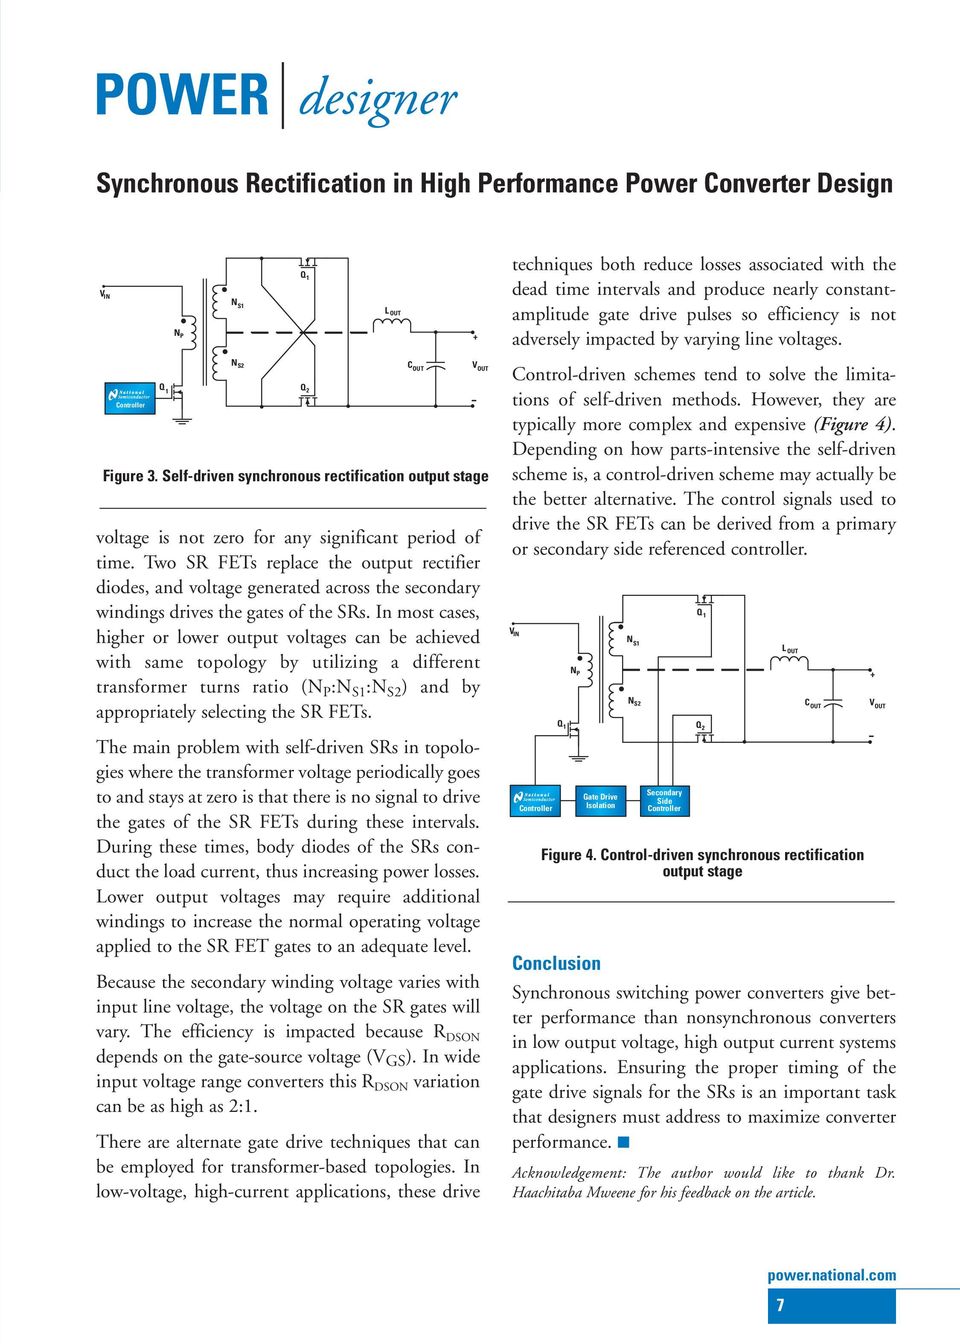 Self-driven synchronous rectification output stage voltage is not zero for any significant period of time.